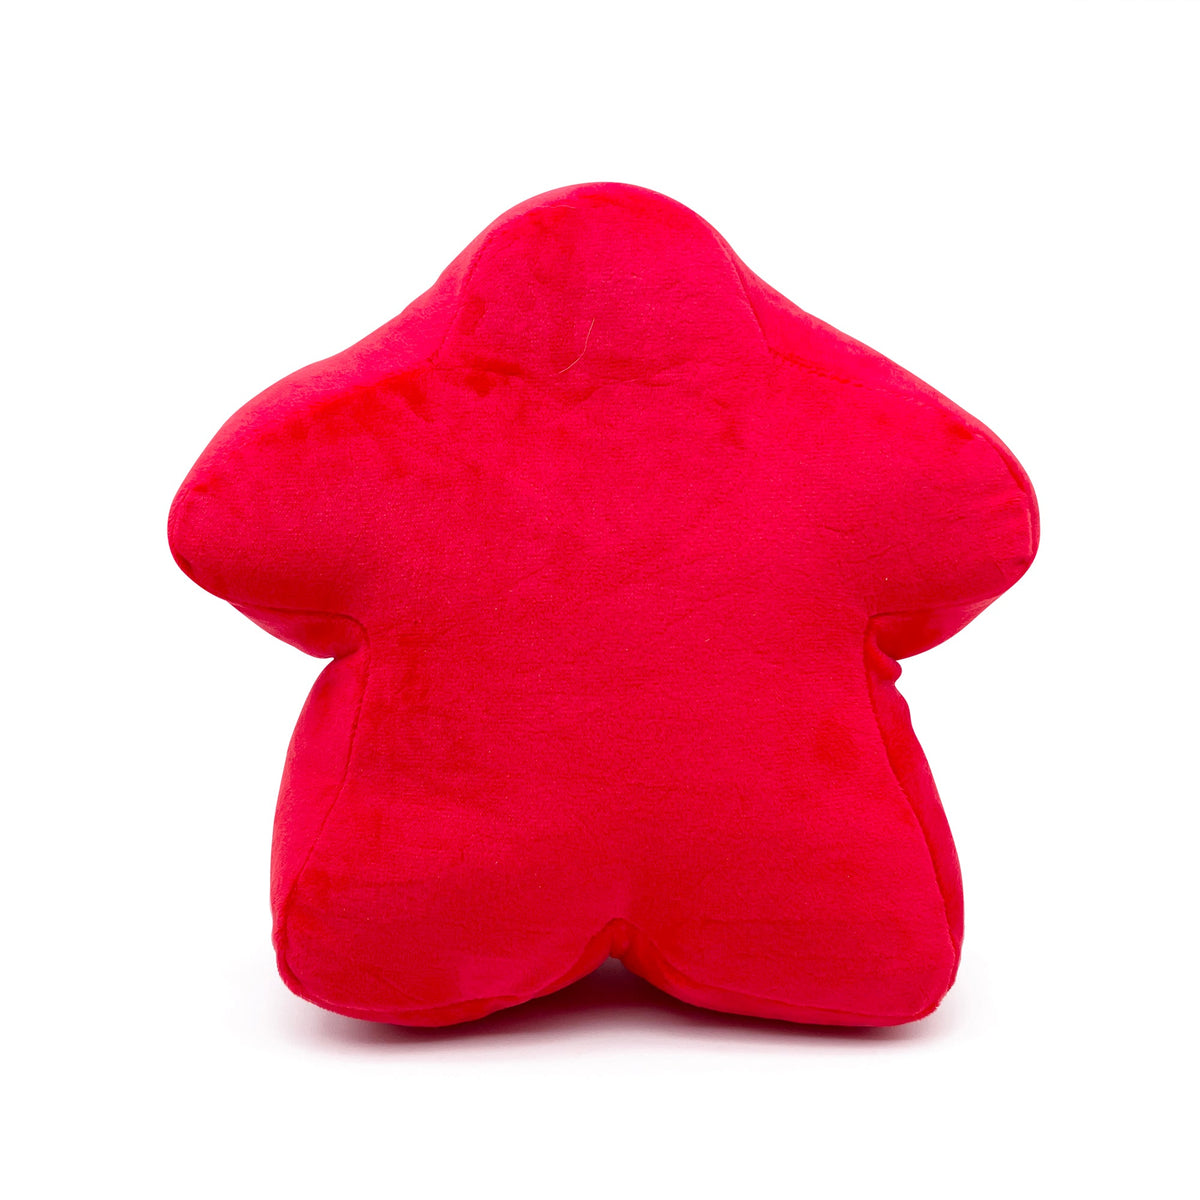 Devils Red - Red Plushie Meeple 170mm Soft Meeple - NOR 03105